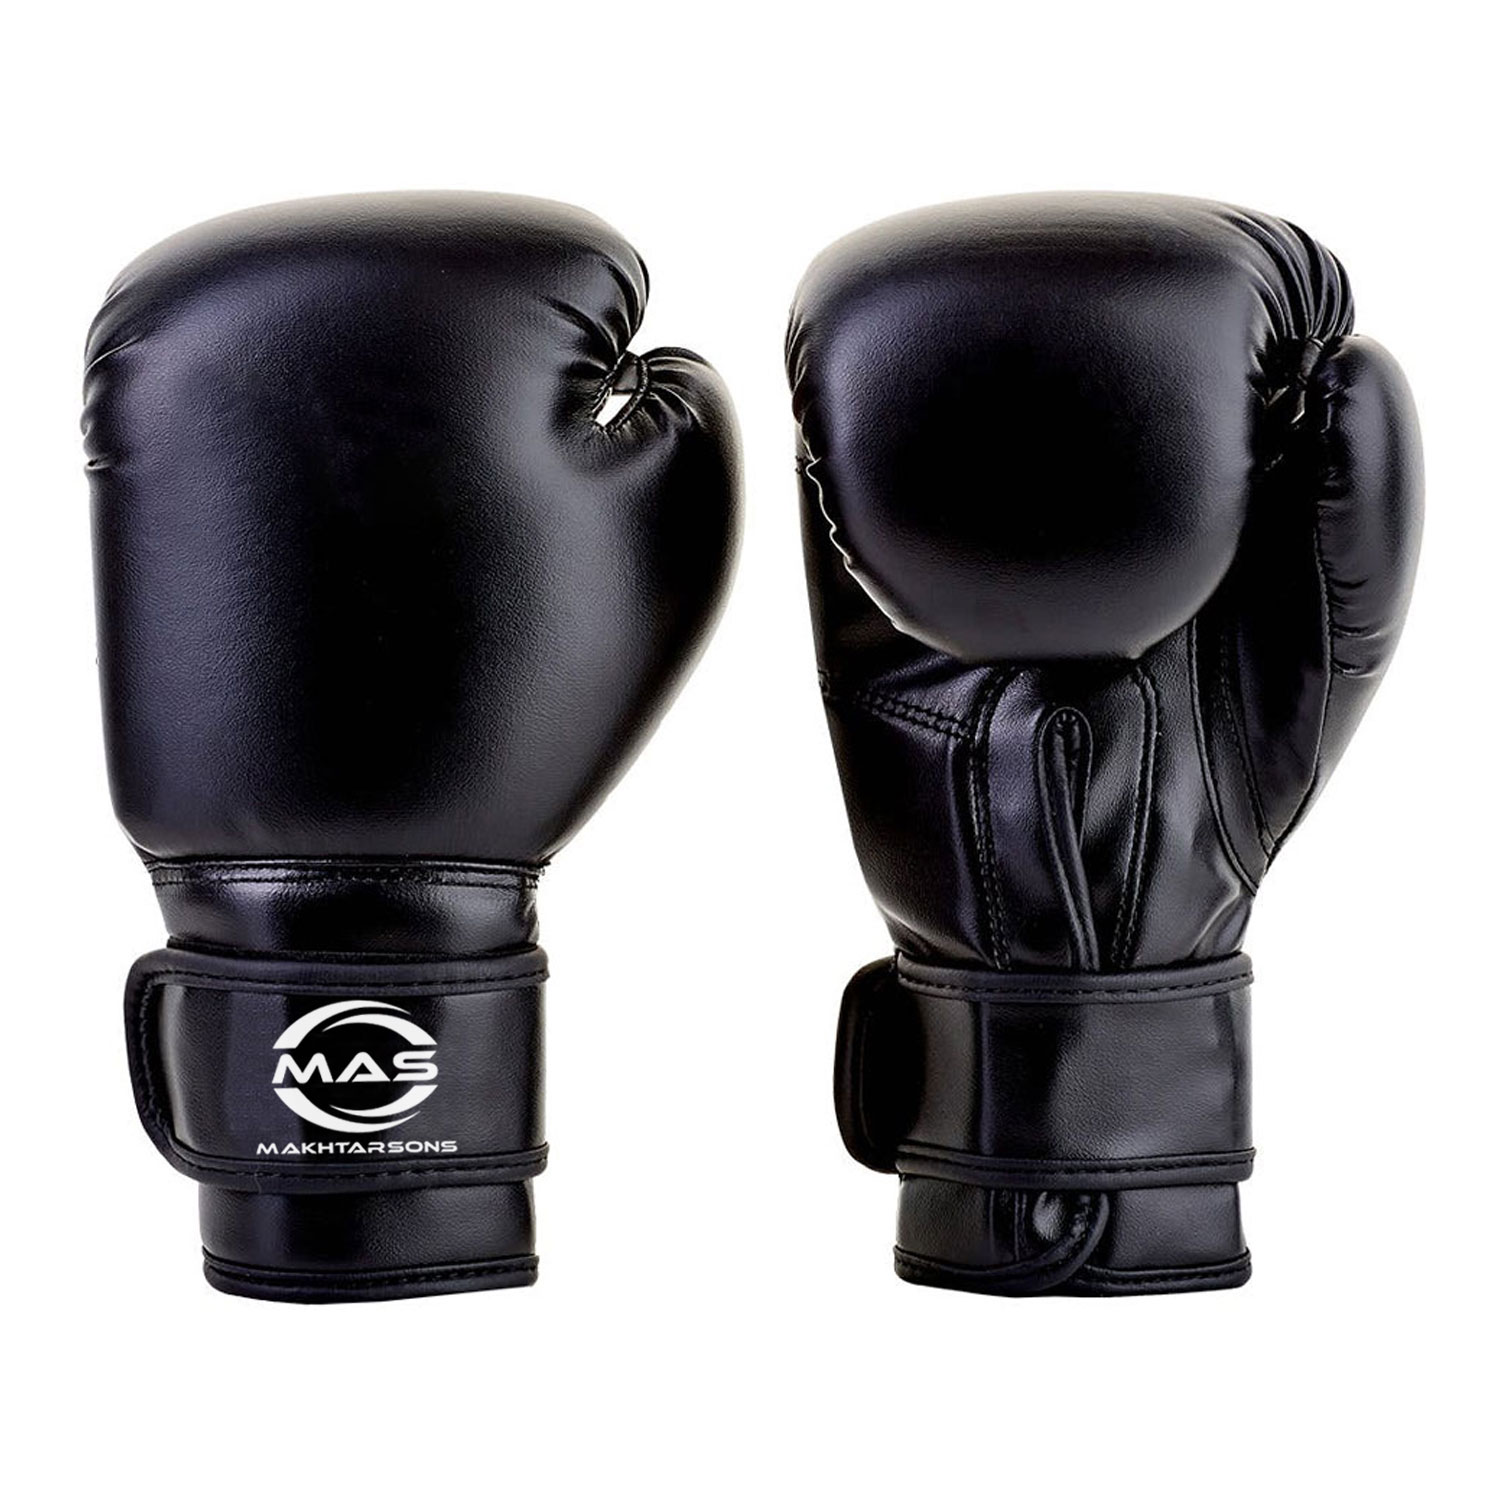 PROFESSIONAL BOXING GLOVES | MAS 210